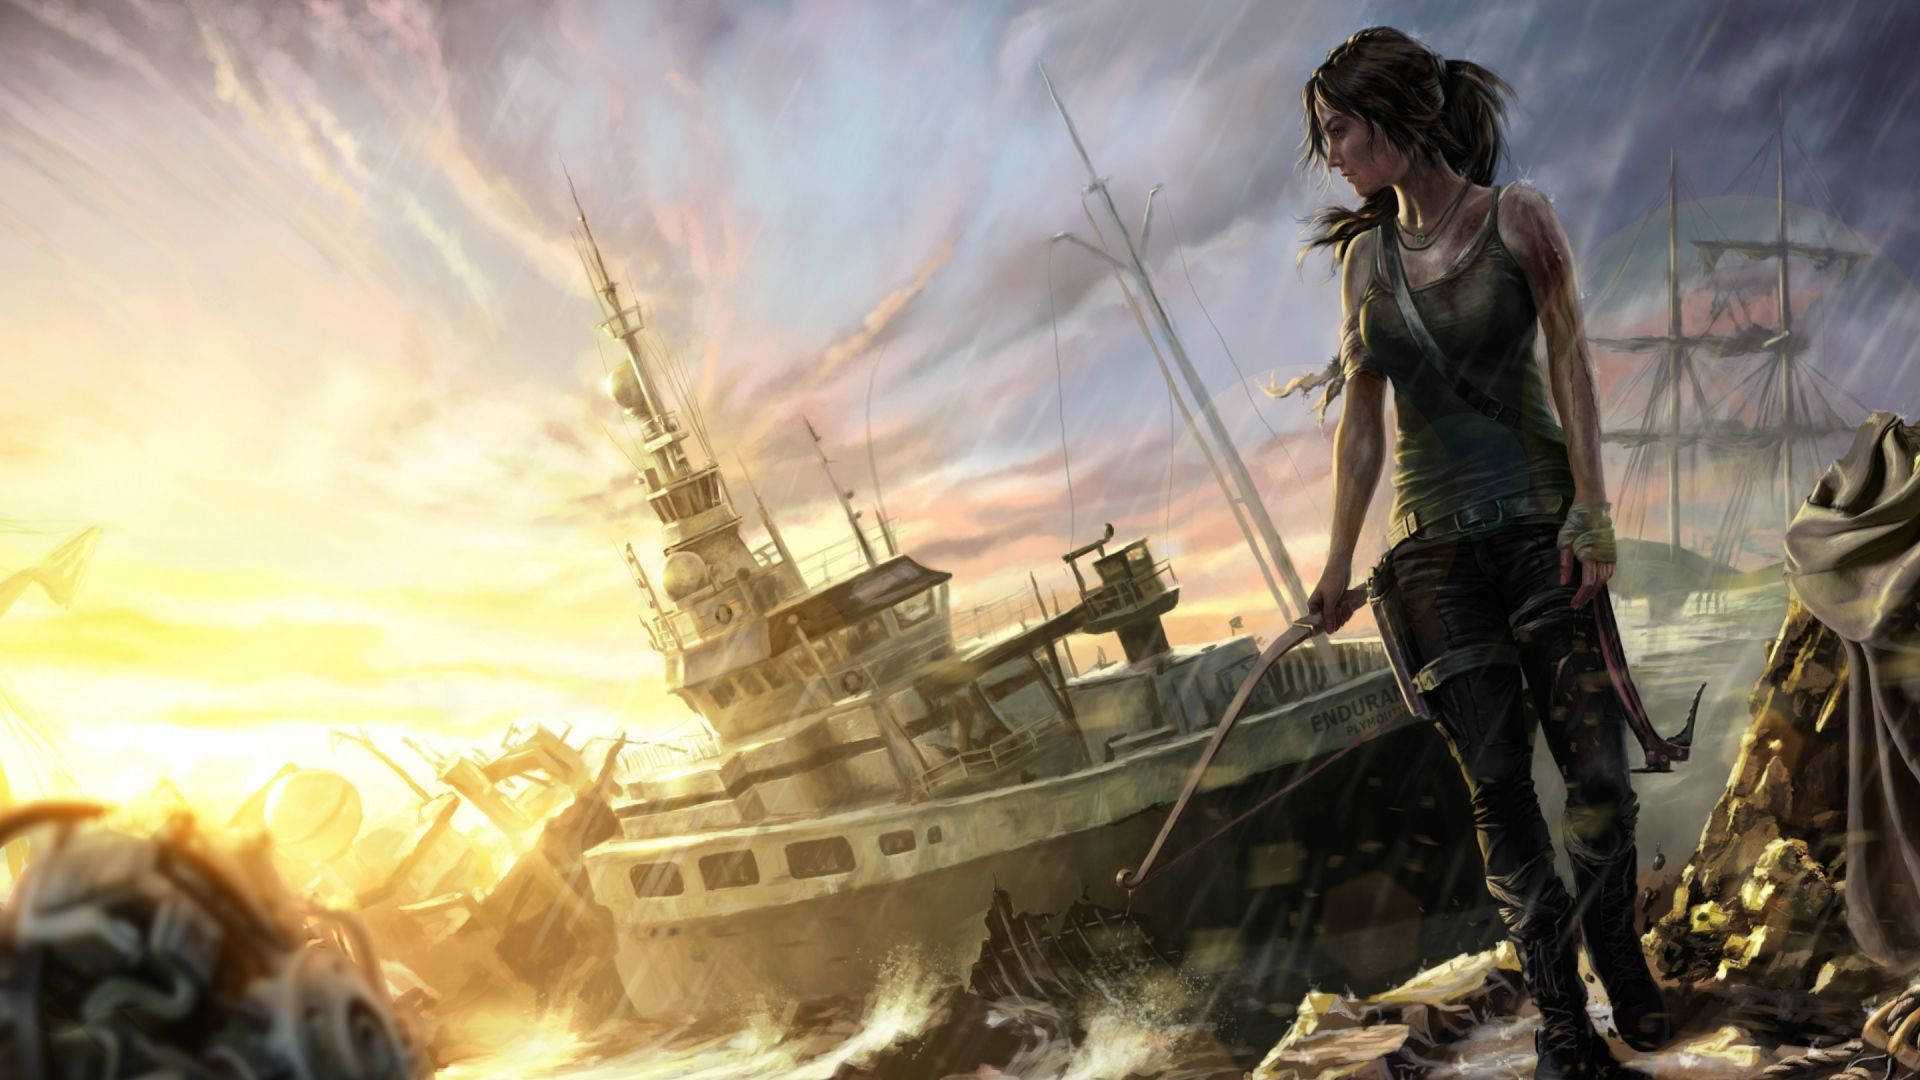 Tomb Raider Ships And Croft Background